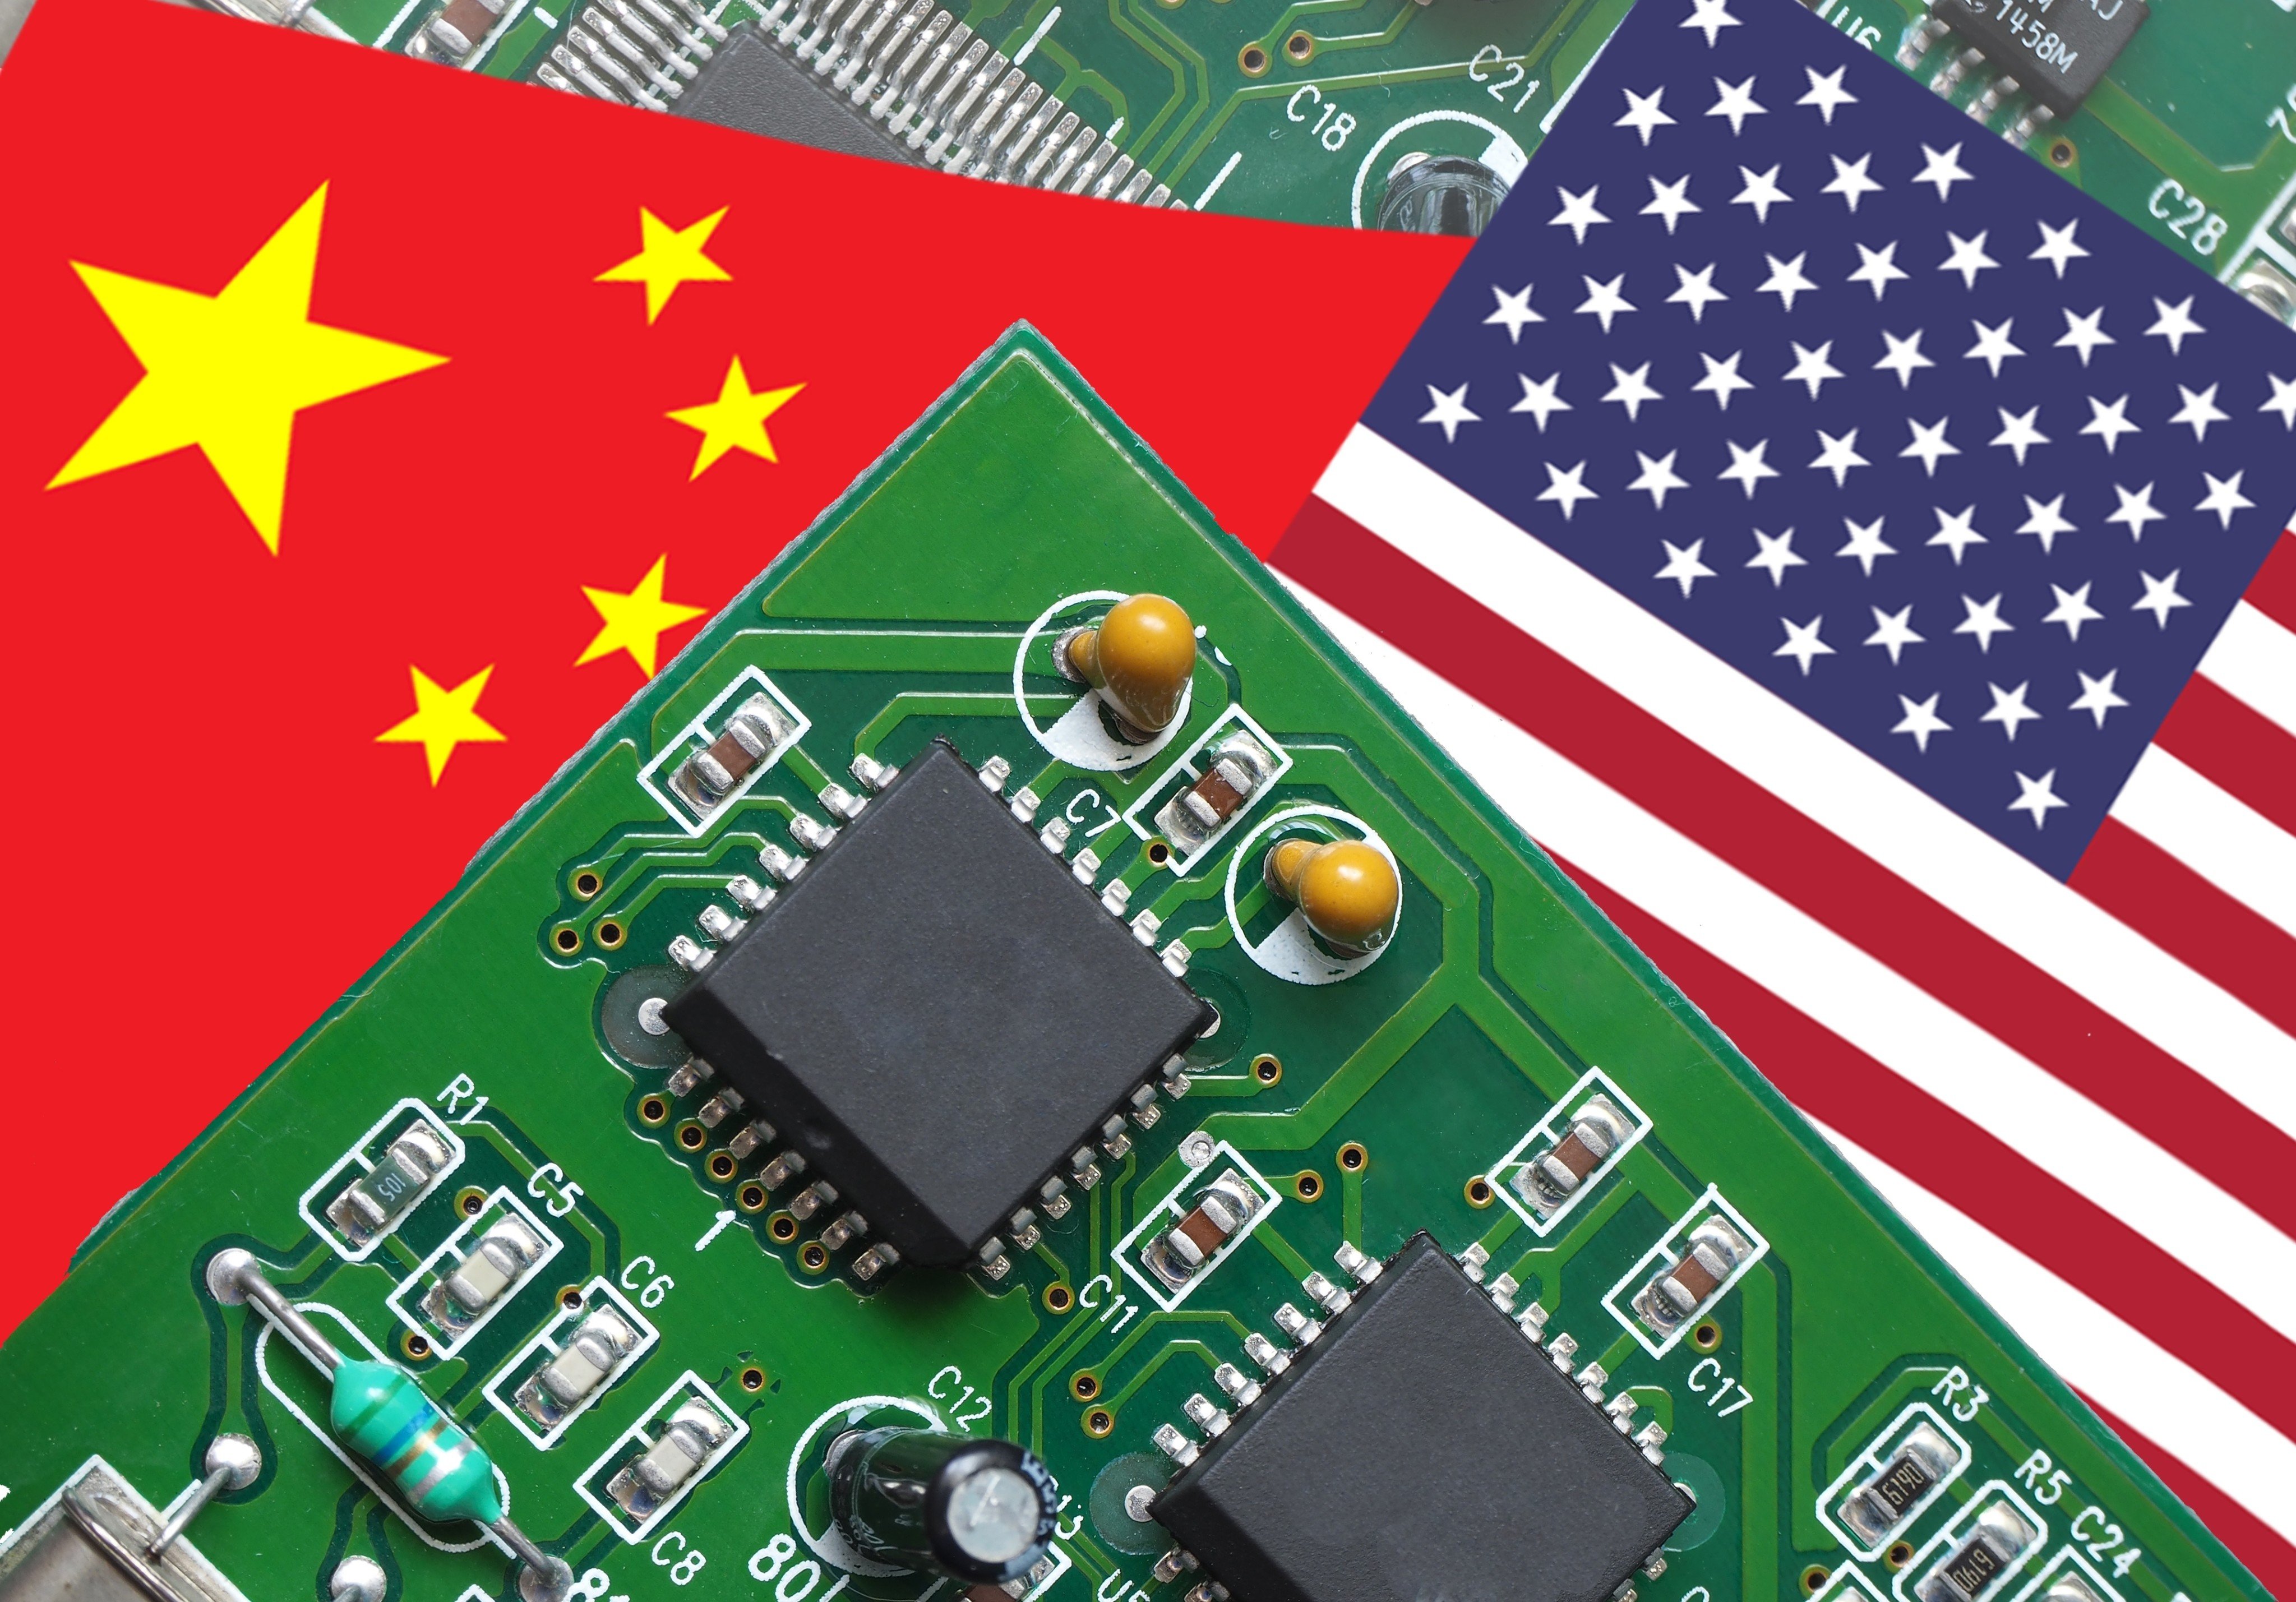 A US House committee approved a bill on Thursday that would add new oversight to any renewal of the landmark Science and Technology Agreement between the US and China. Image: Shutterstock 